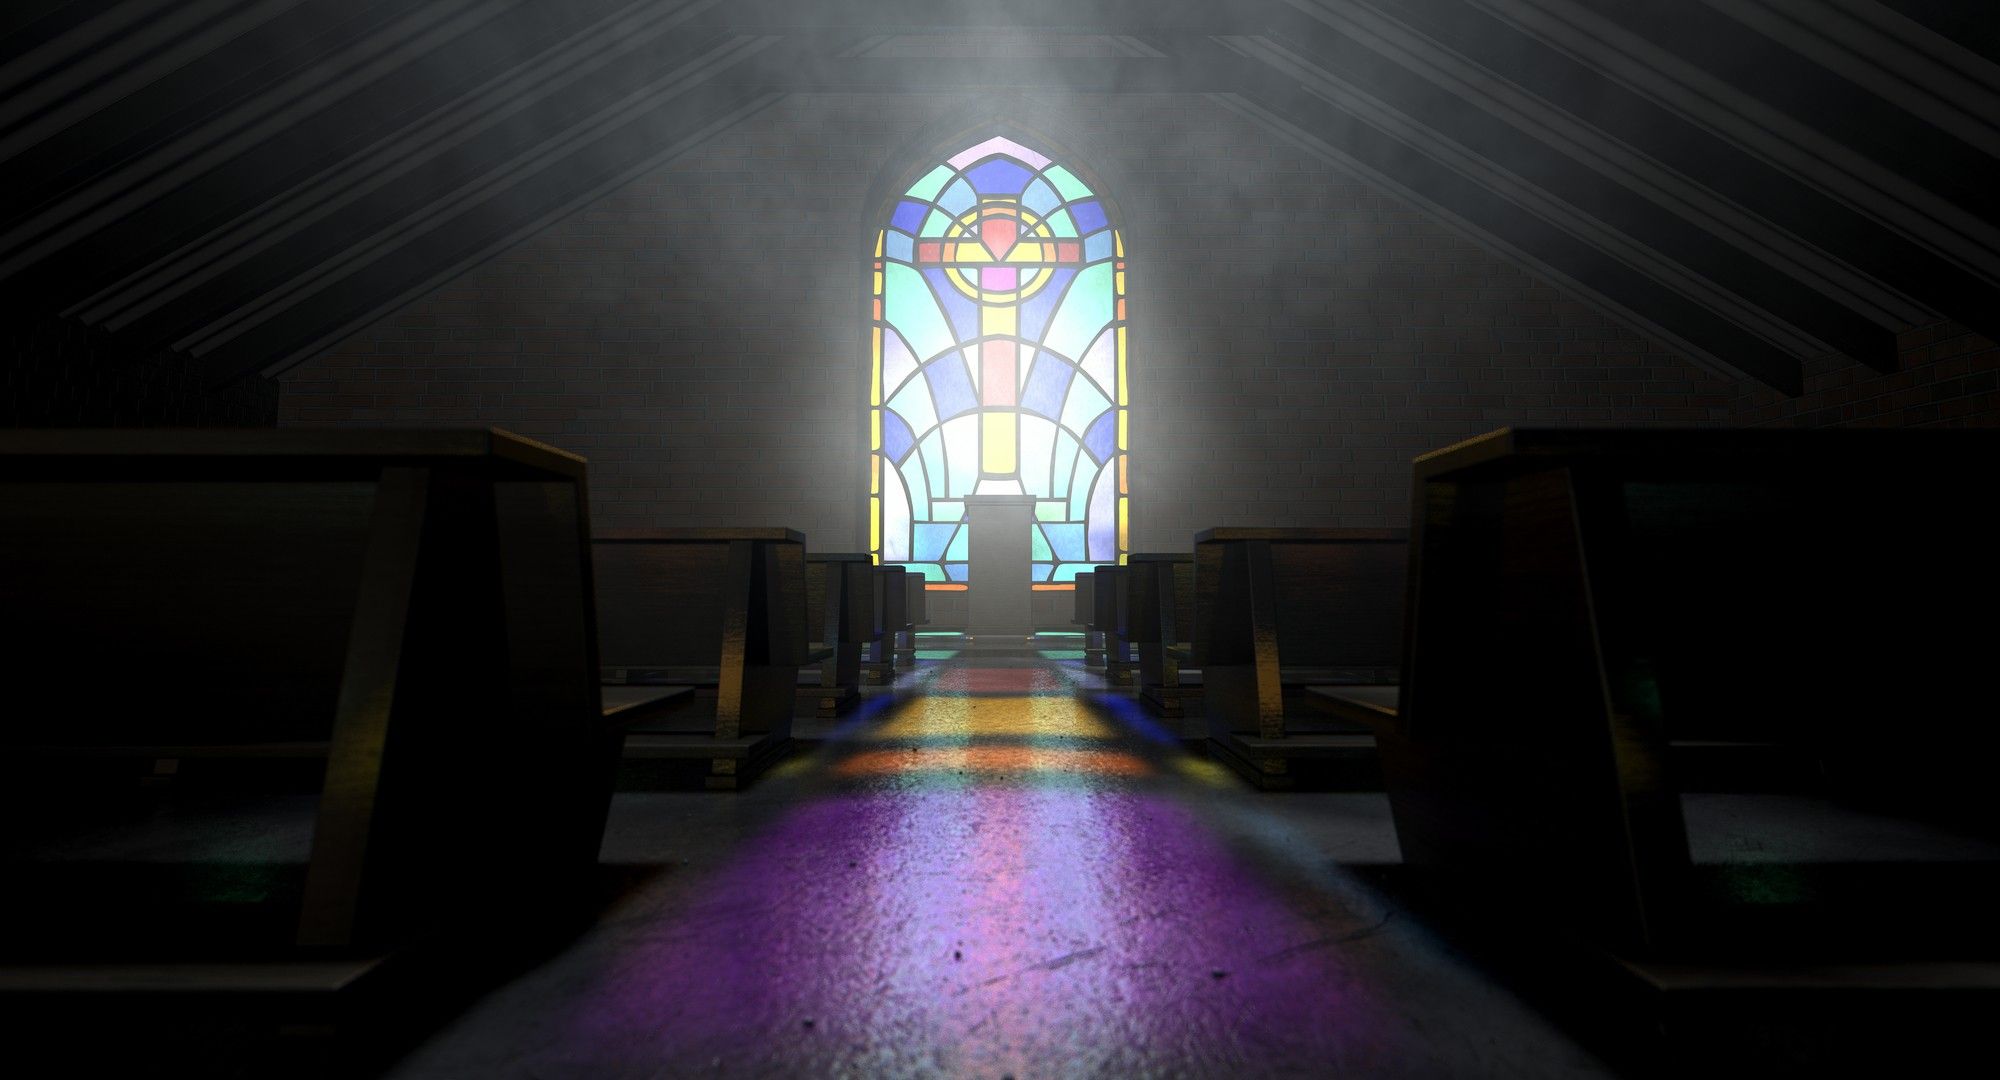 Church interior with stained glass